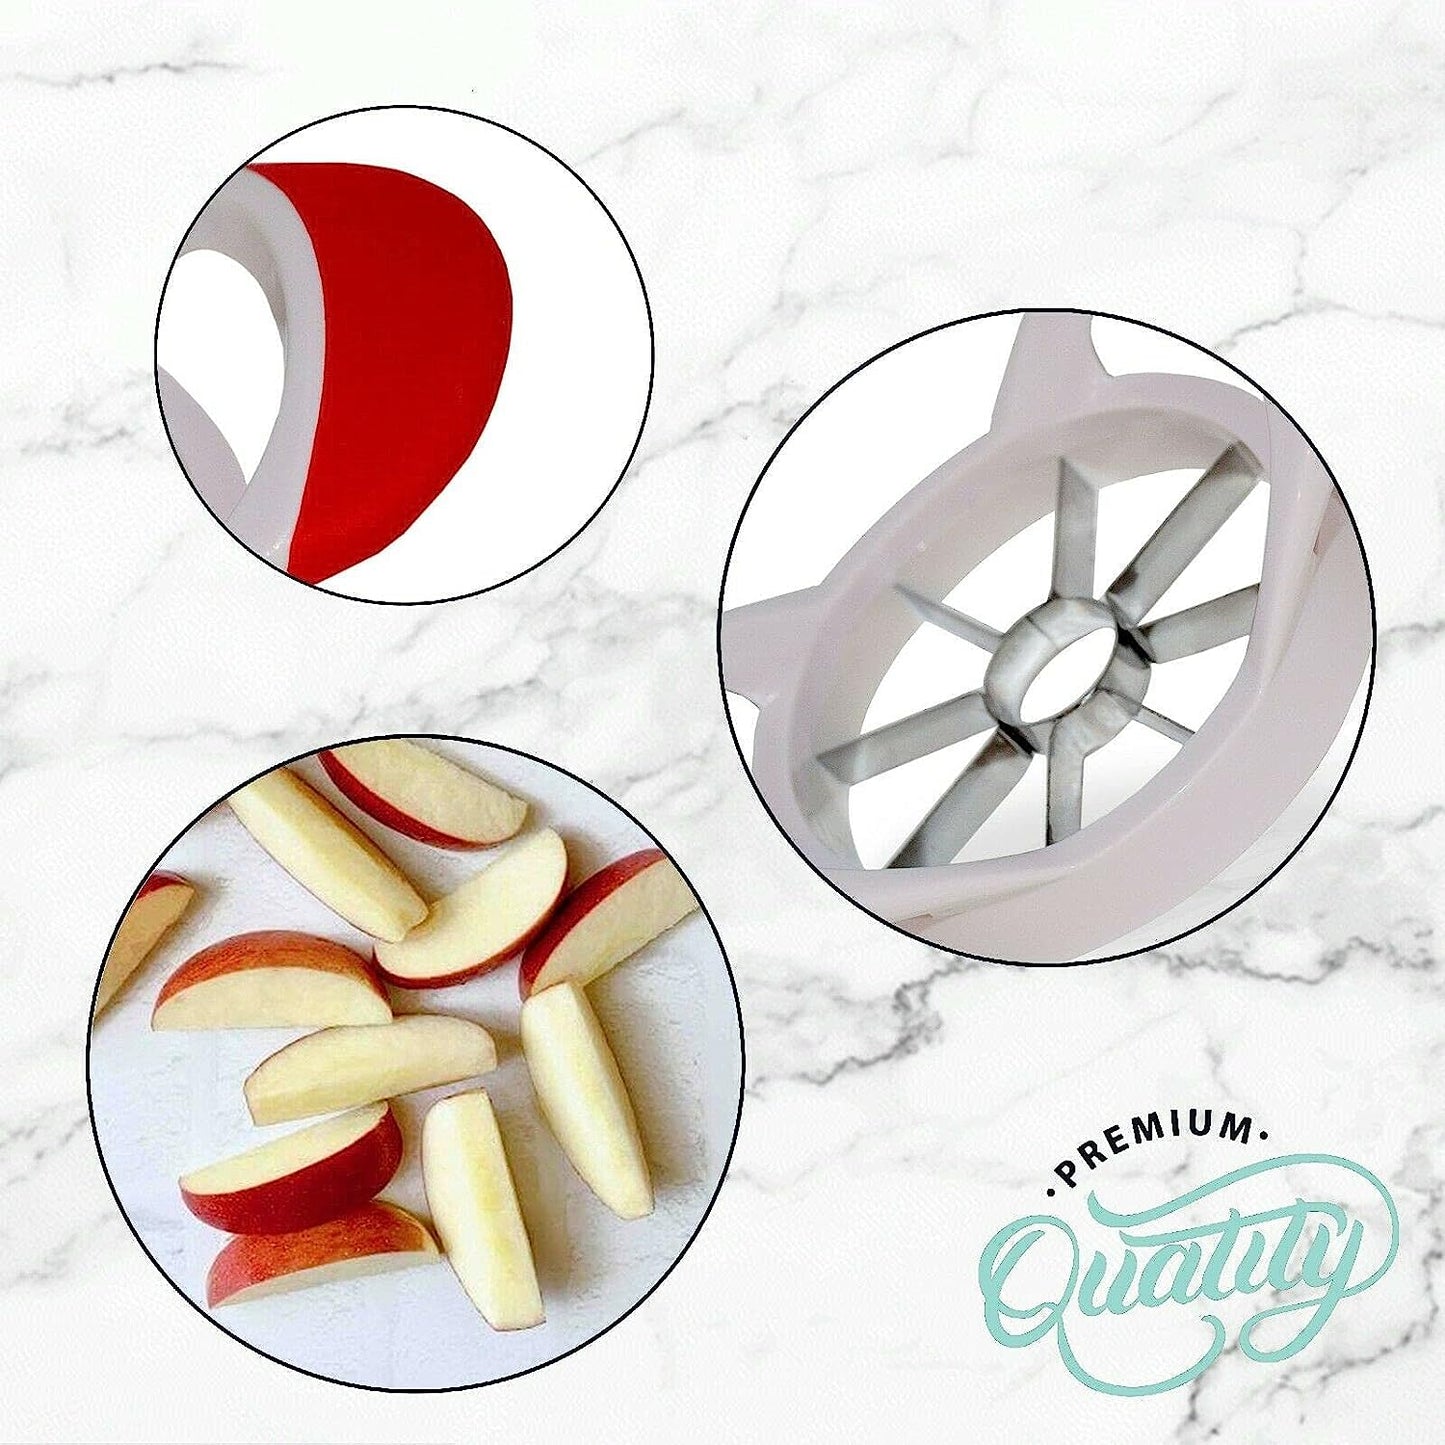 Premium Stainless Steel Apple Slicer, Corer and Divider, Easy to Use Kitchen Gadget